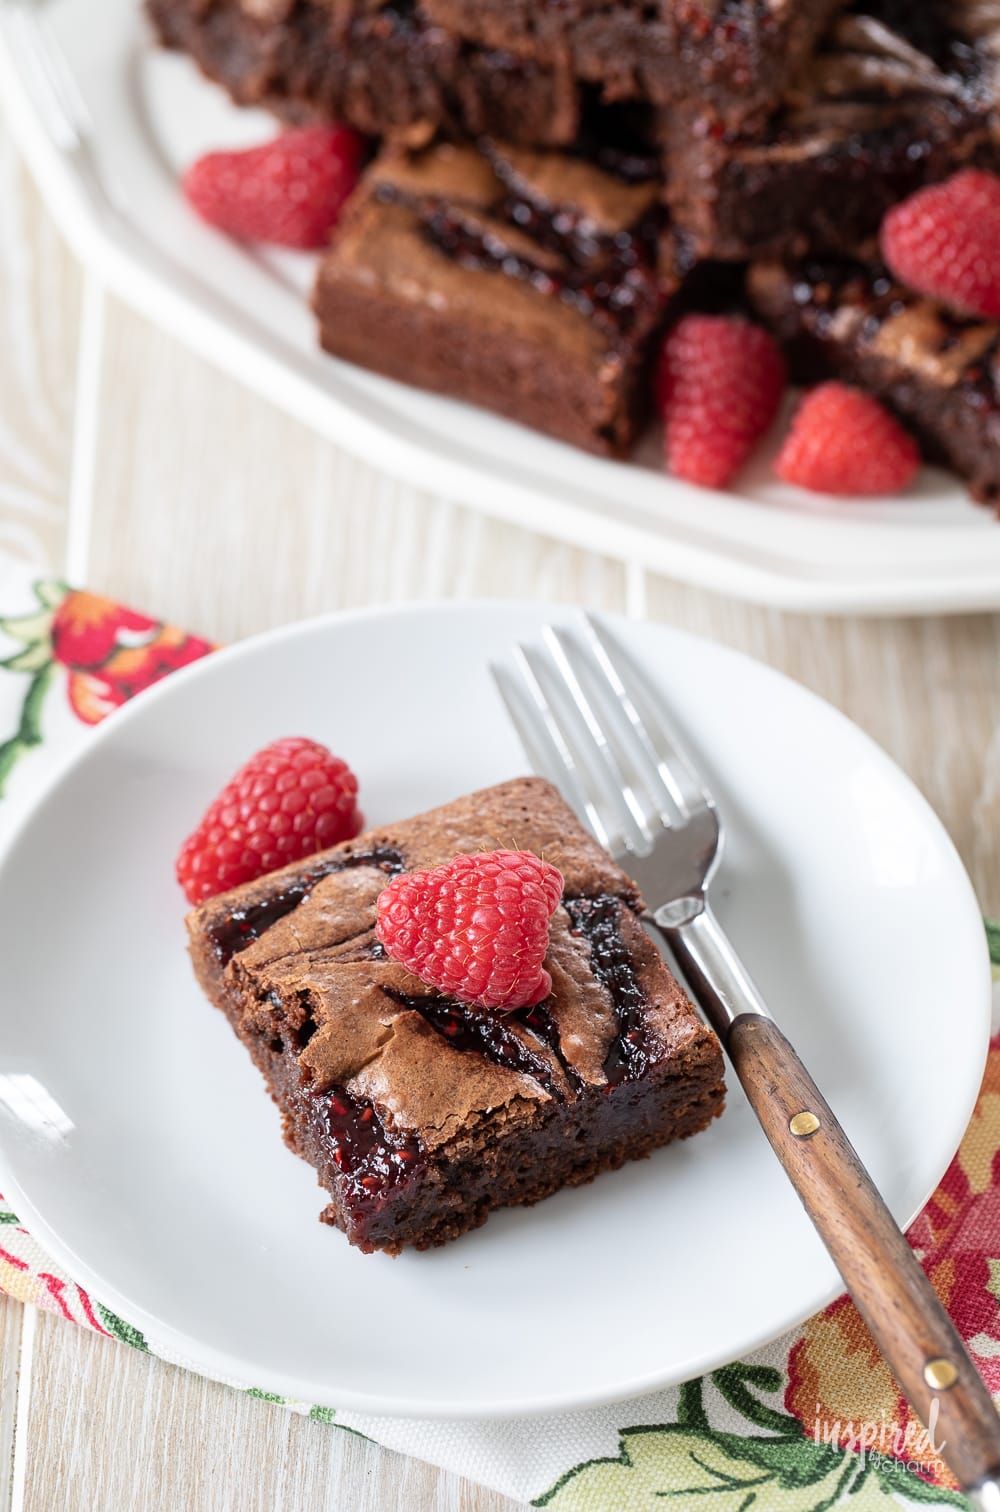 Raspberry Brownie on a plate with fork.